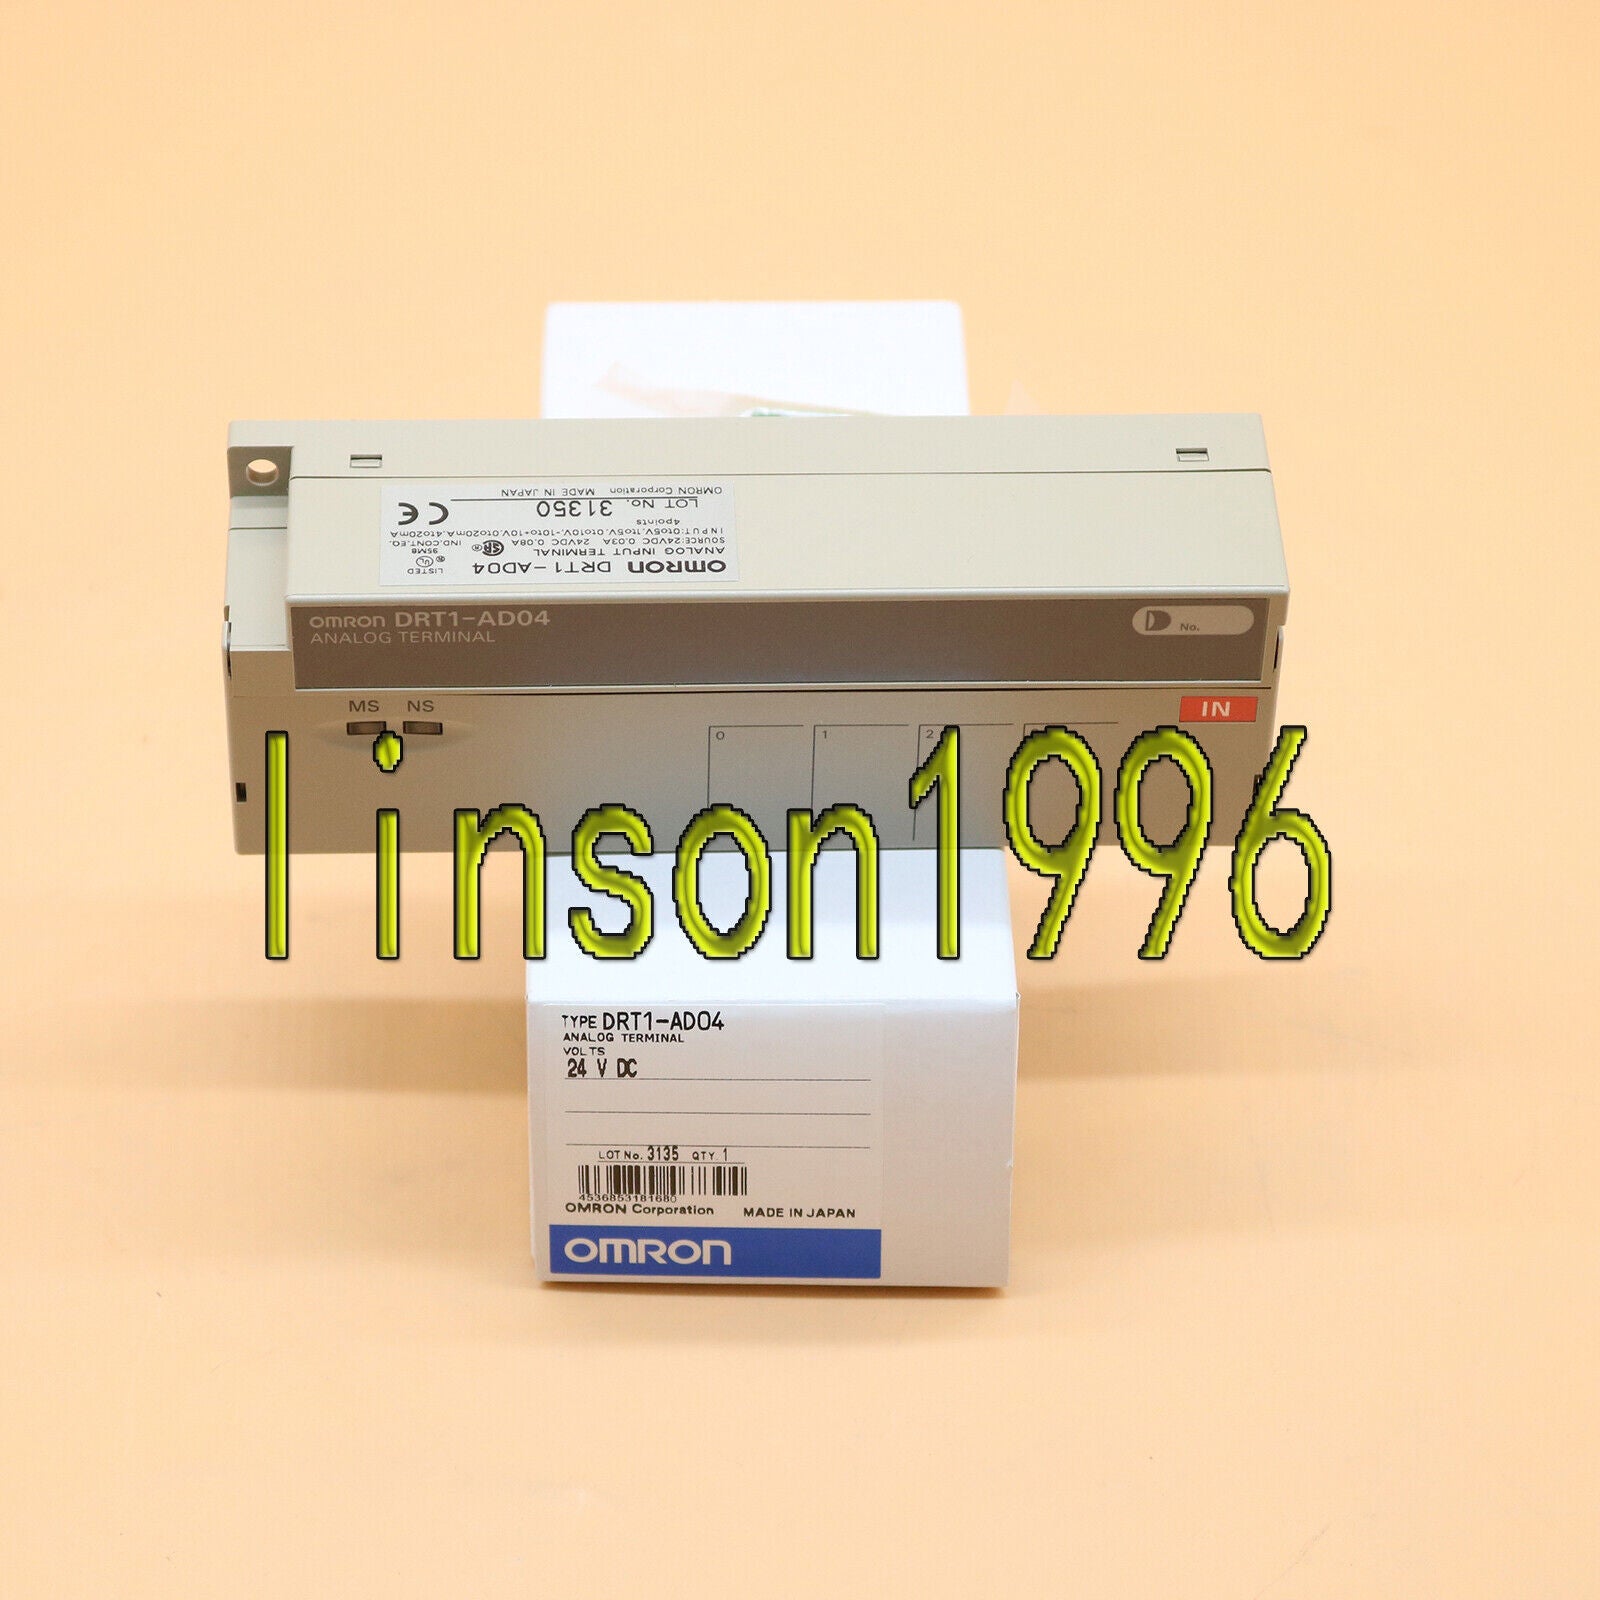 new Omron DRT1-AD04  programmable control module in box spot stocks